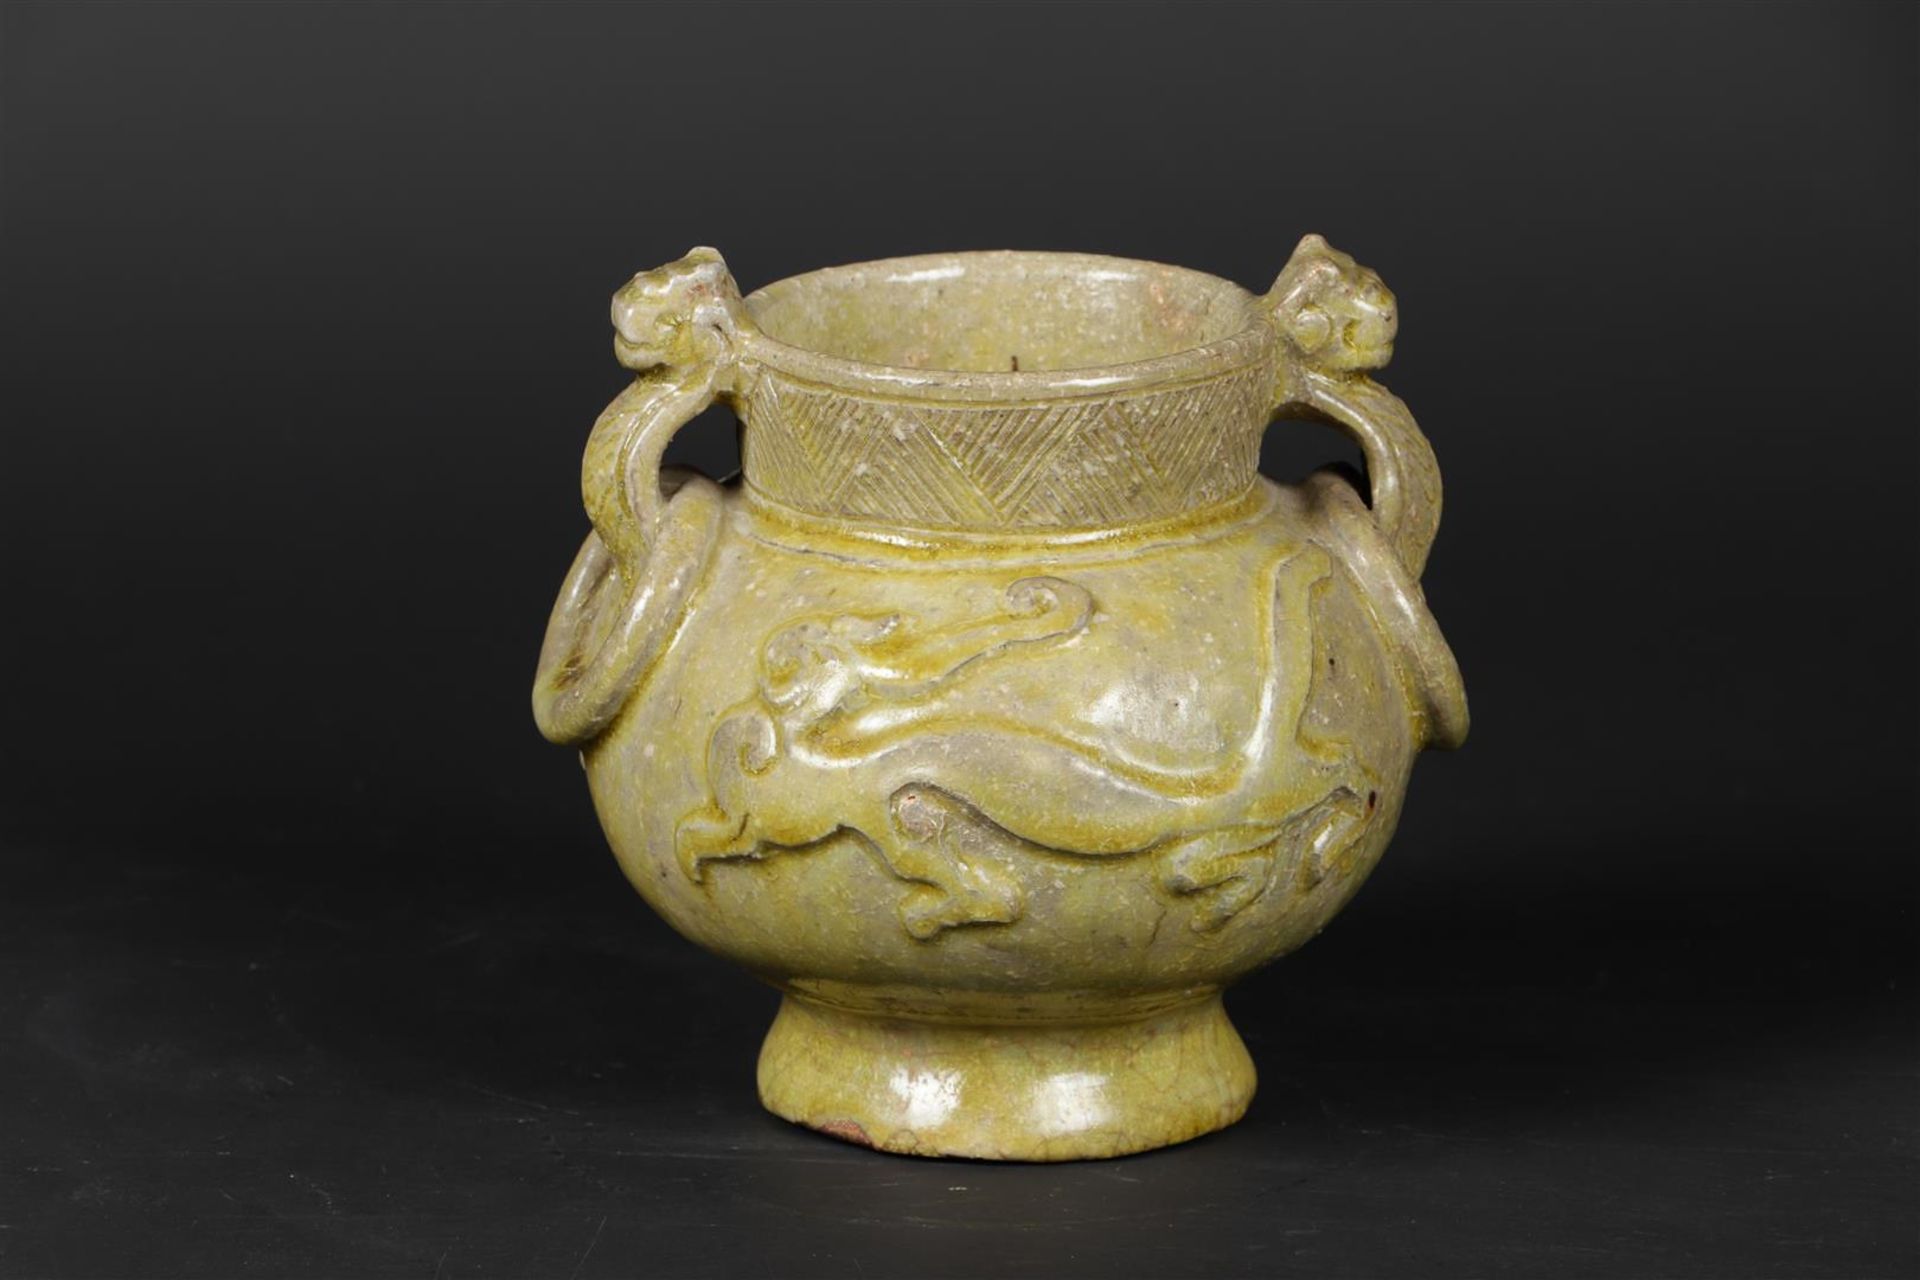 An earthenware censer decorated with dragons, after an antique example.